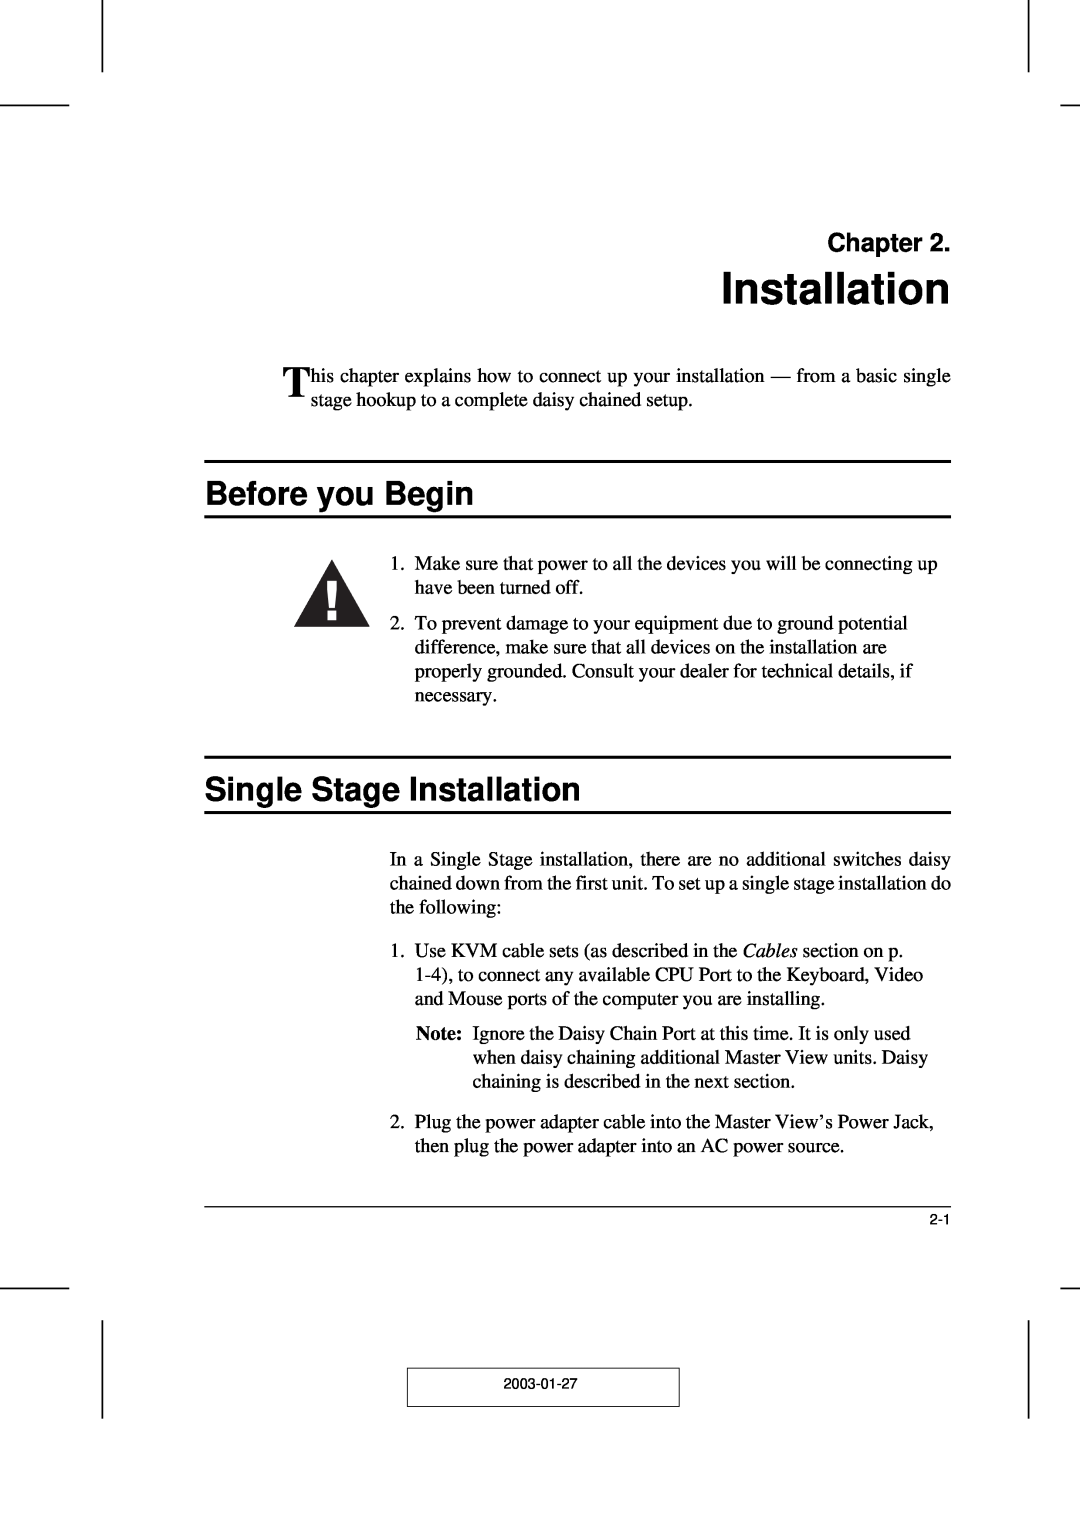 ATEN Technology ACS-1216AL, ACS-1208AL user manual Before you Begin, Single Stage Installation, Chapter 